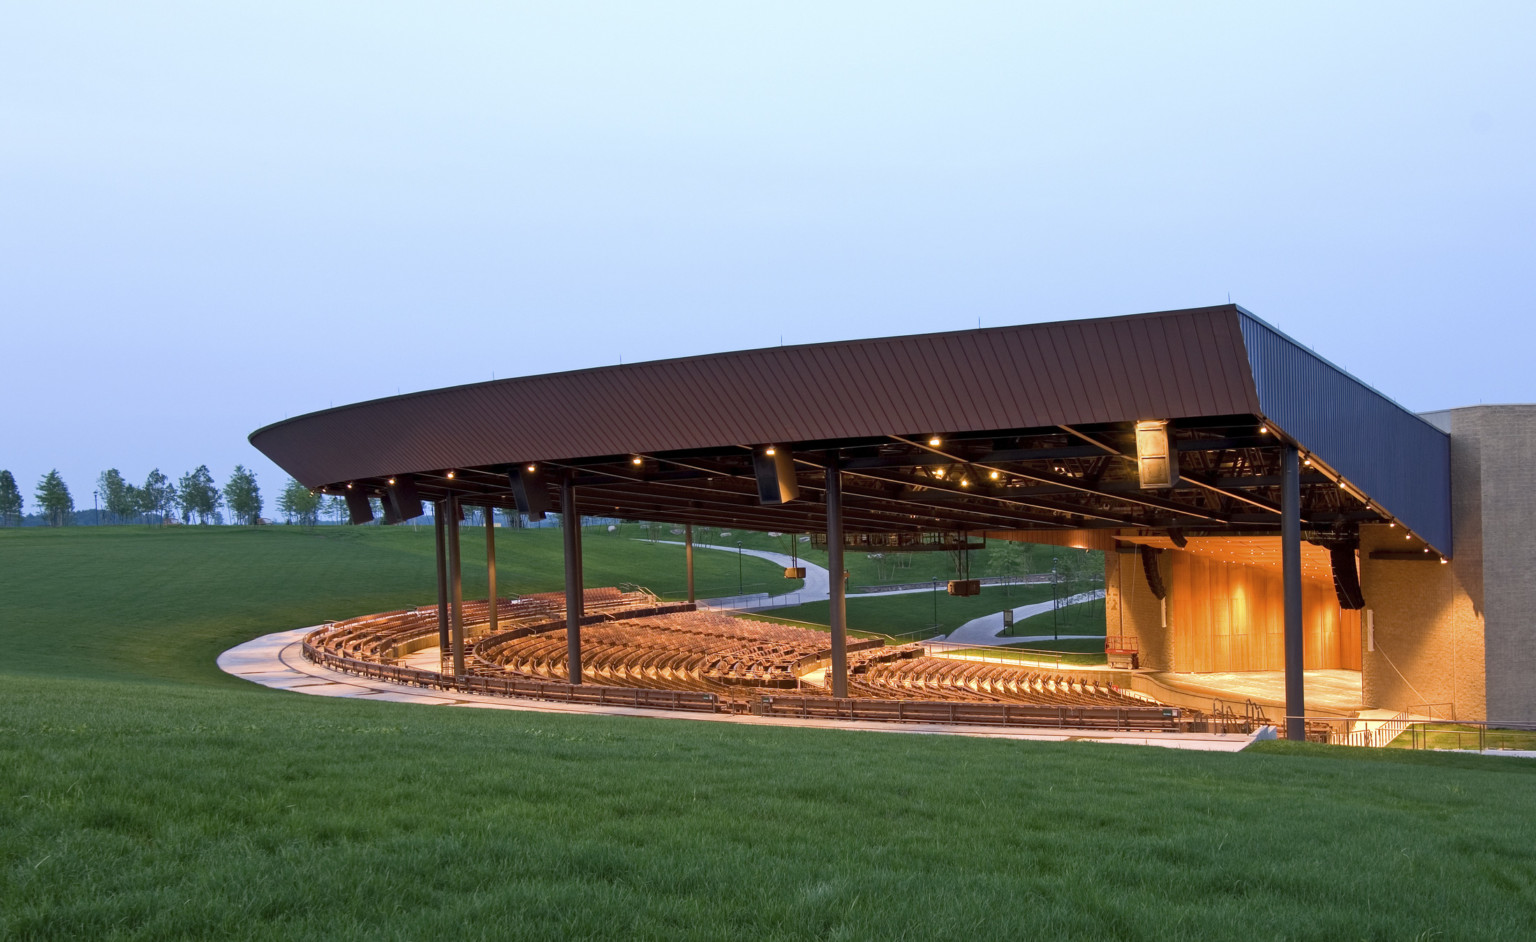 Bethel Woods Center for the Arts outdoor amphitheater illuminated with yellow light in the evening